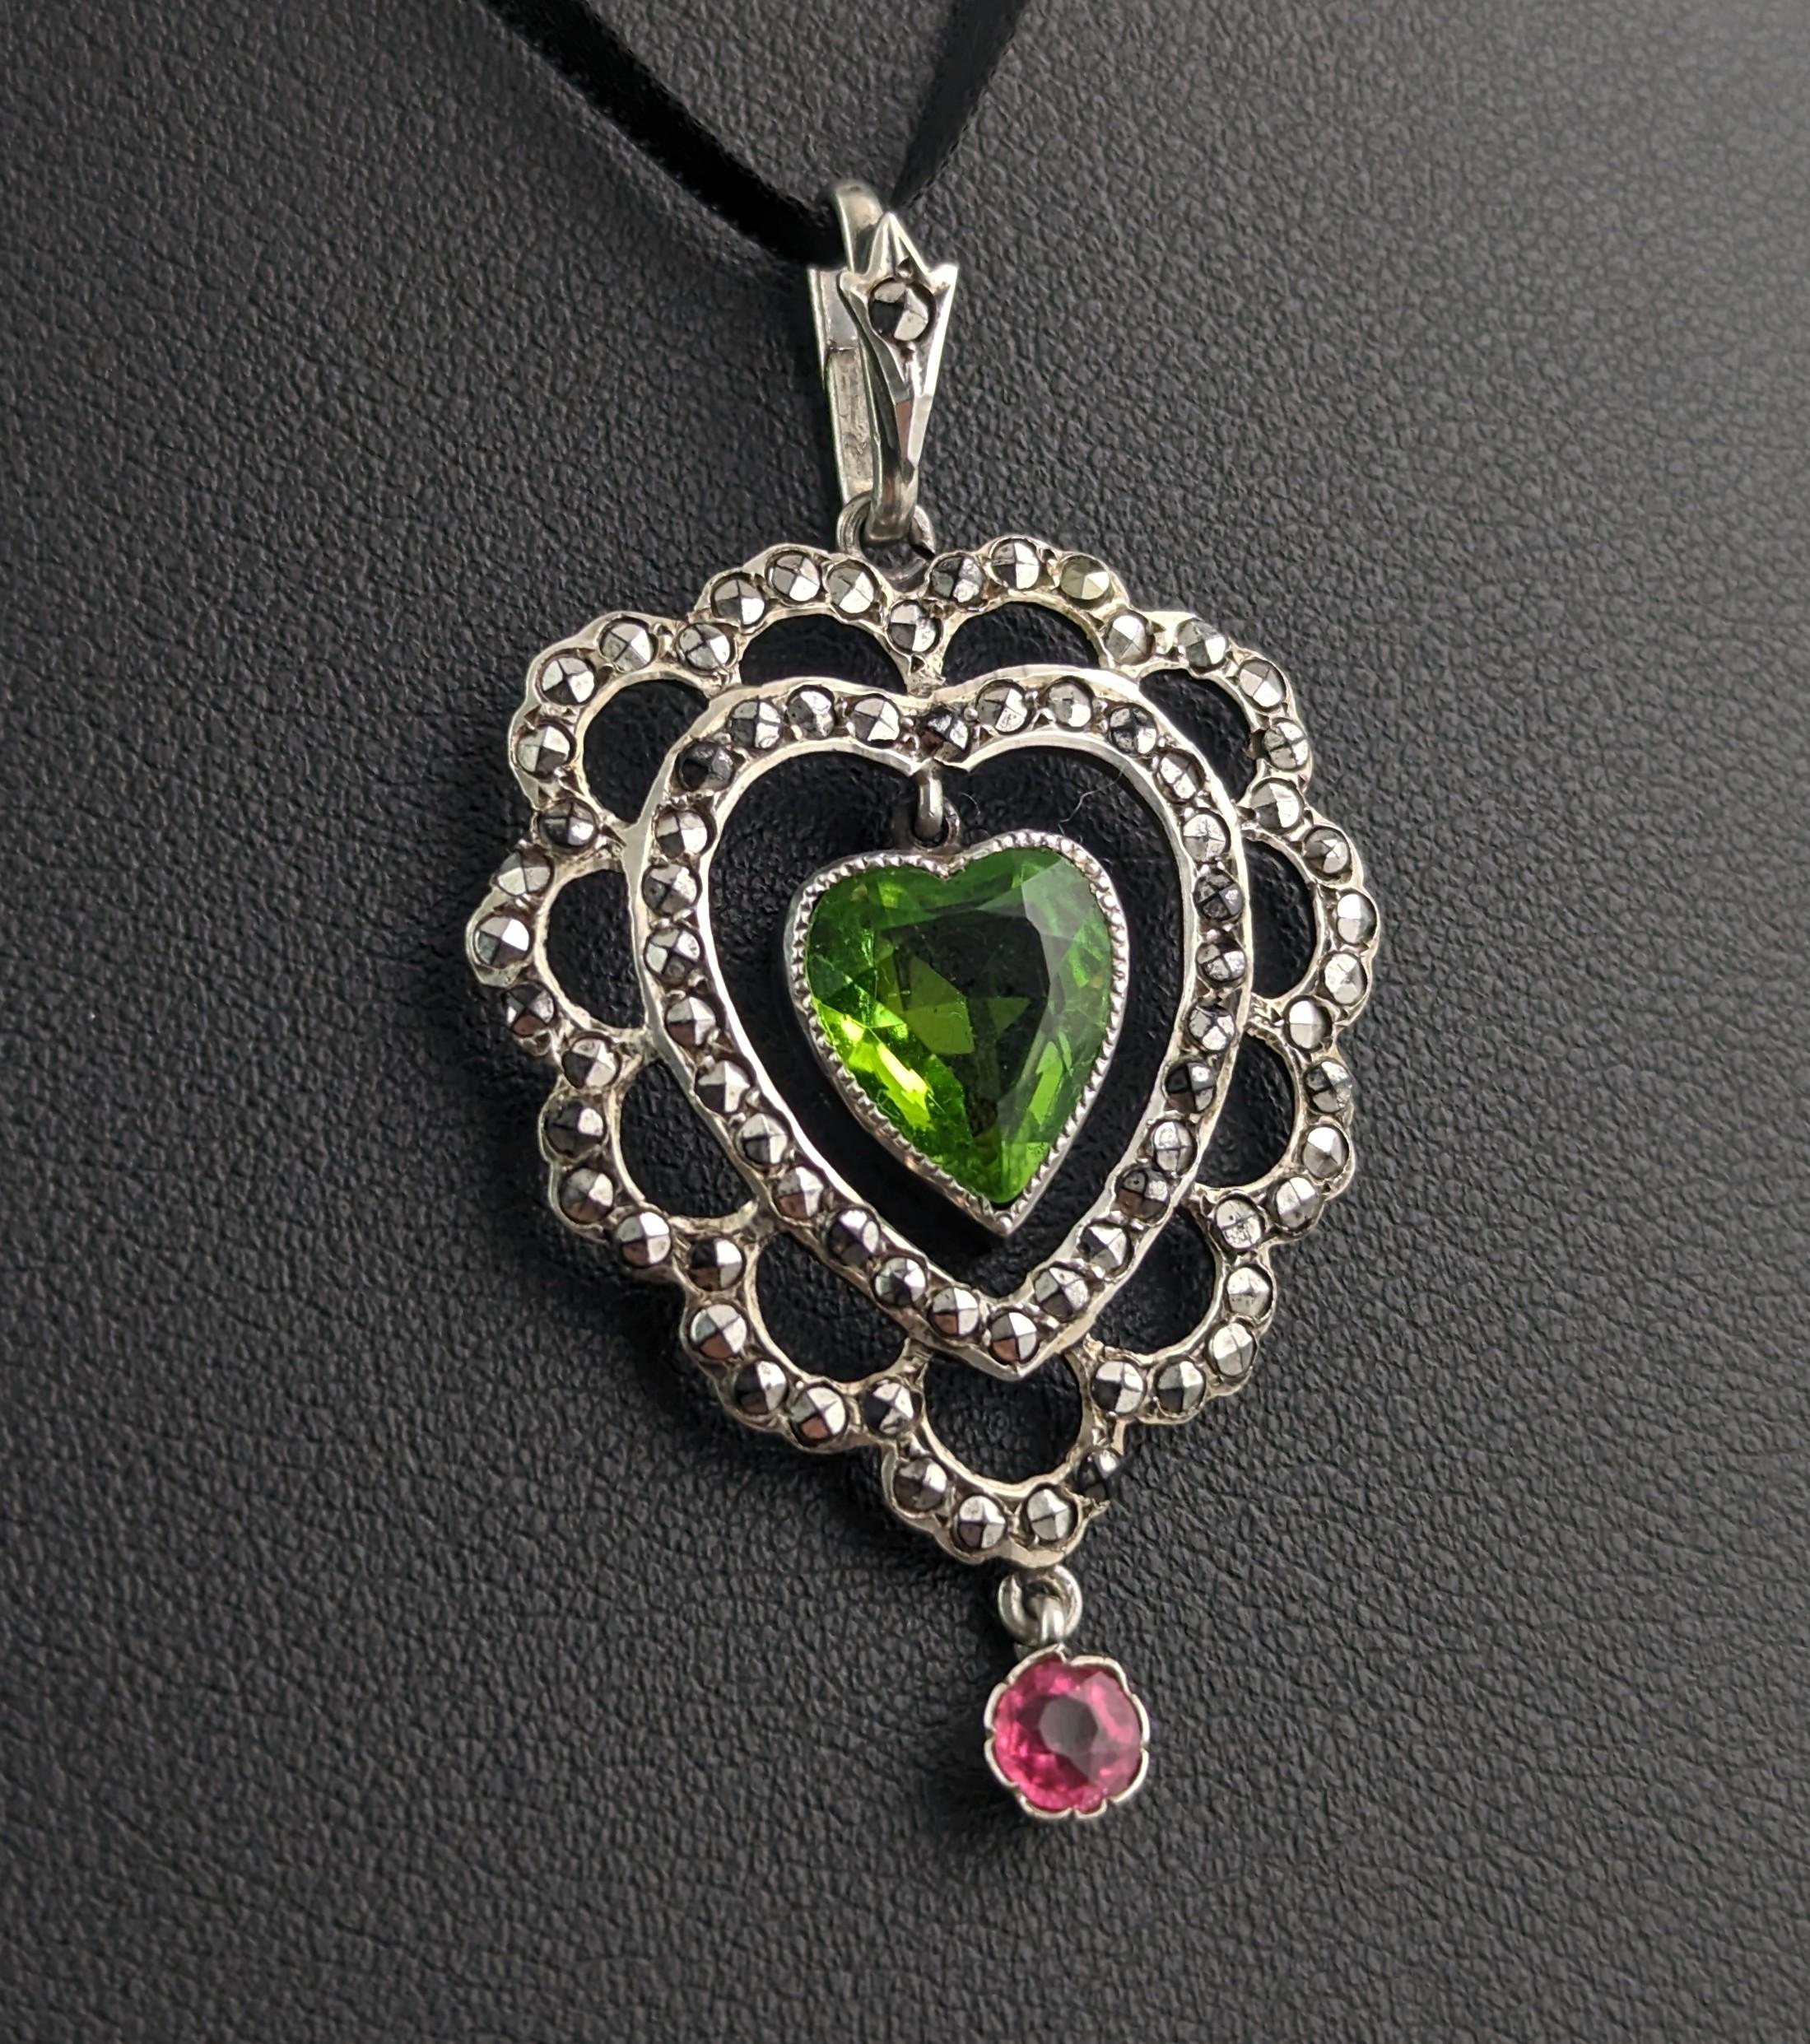 A beautiful antique Art Deco era paste heart dropper pendant.

Crafted in 800 silver it is likely a German made piece, it features a stylised open heart design with an almost floral like outer border all set with twinkling marcasite.

To the centre